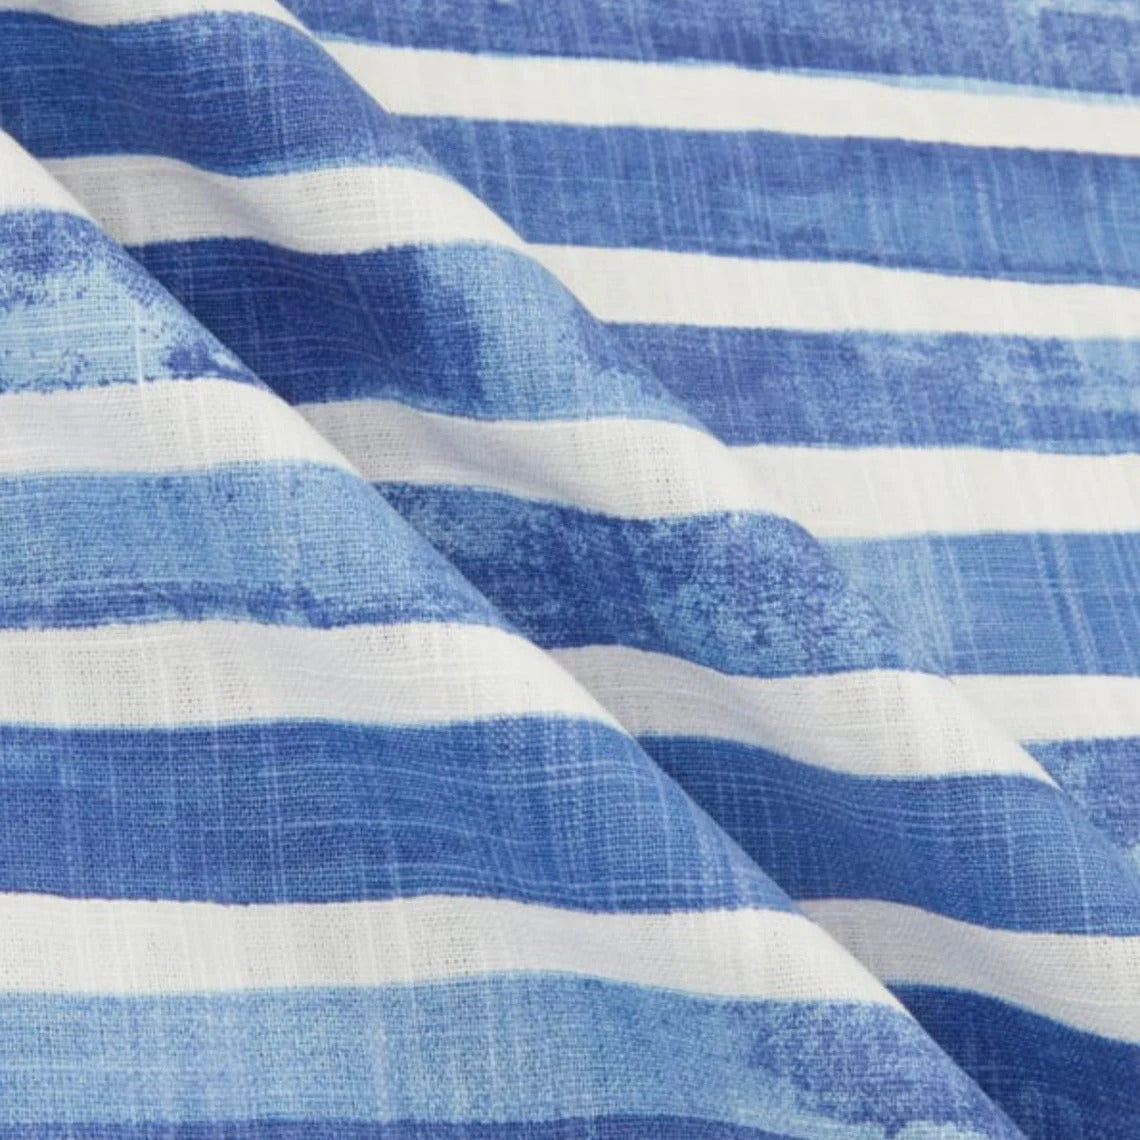 duvet cover in nelson commodore blue horizontal watercolor stripe